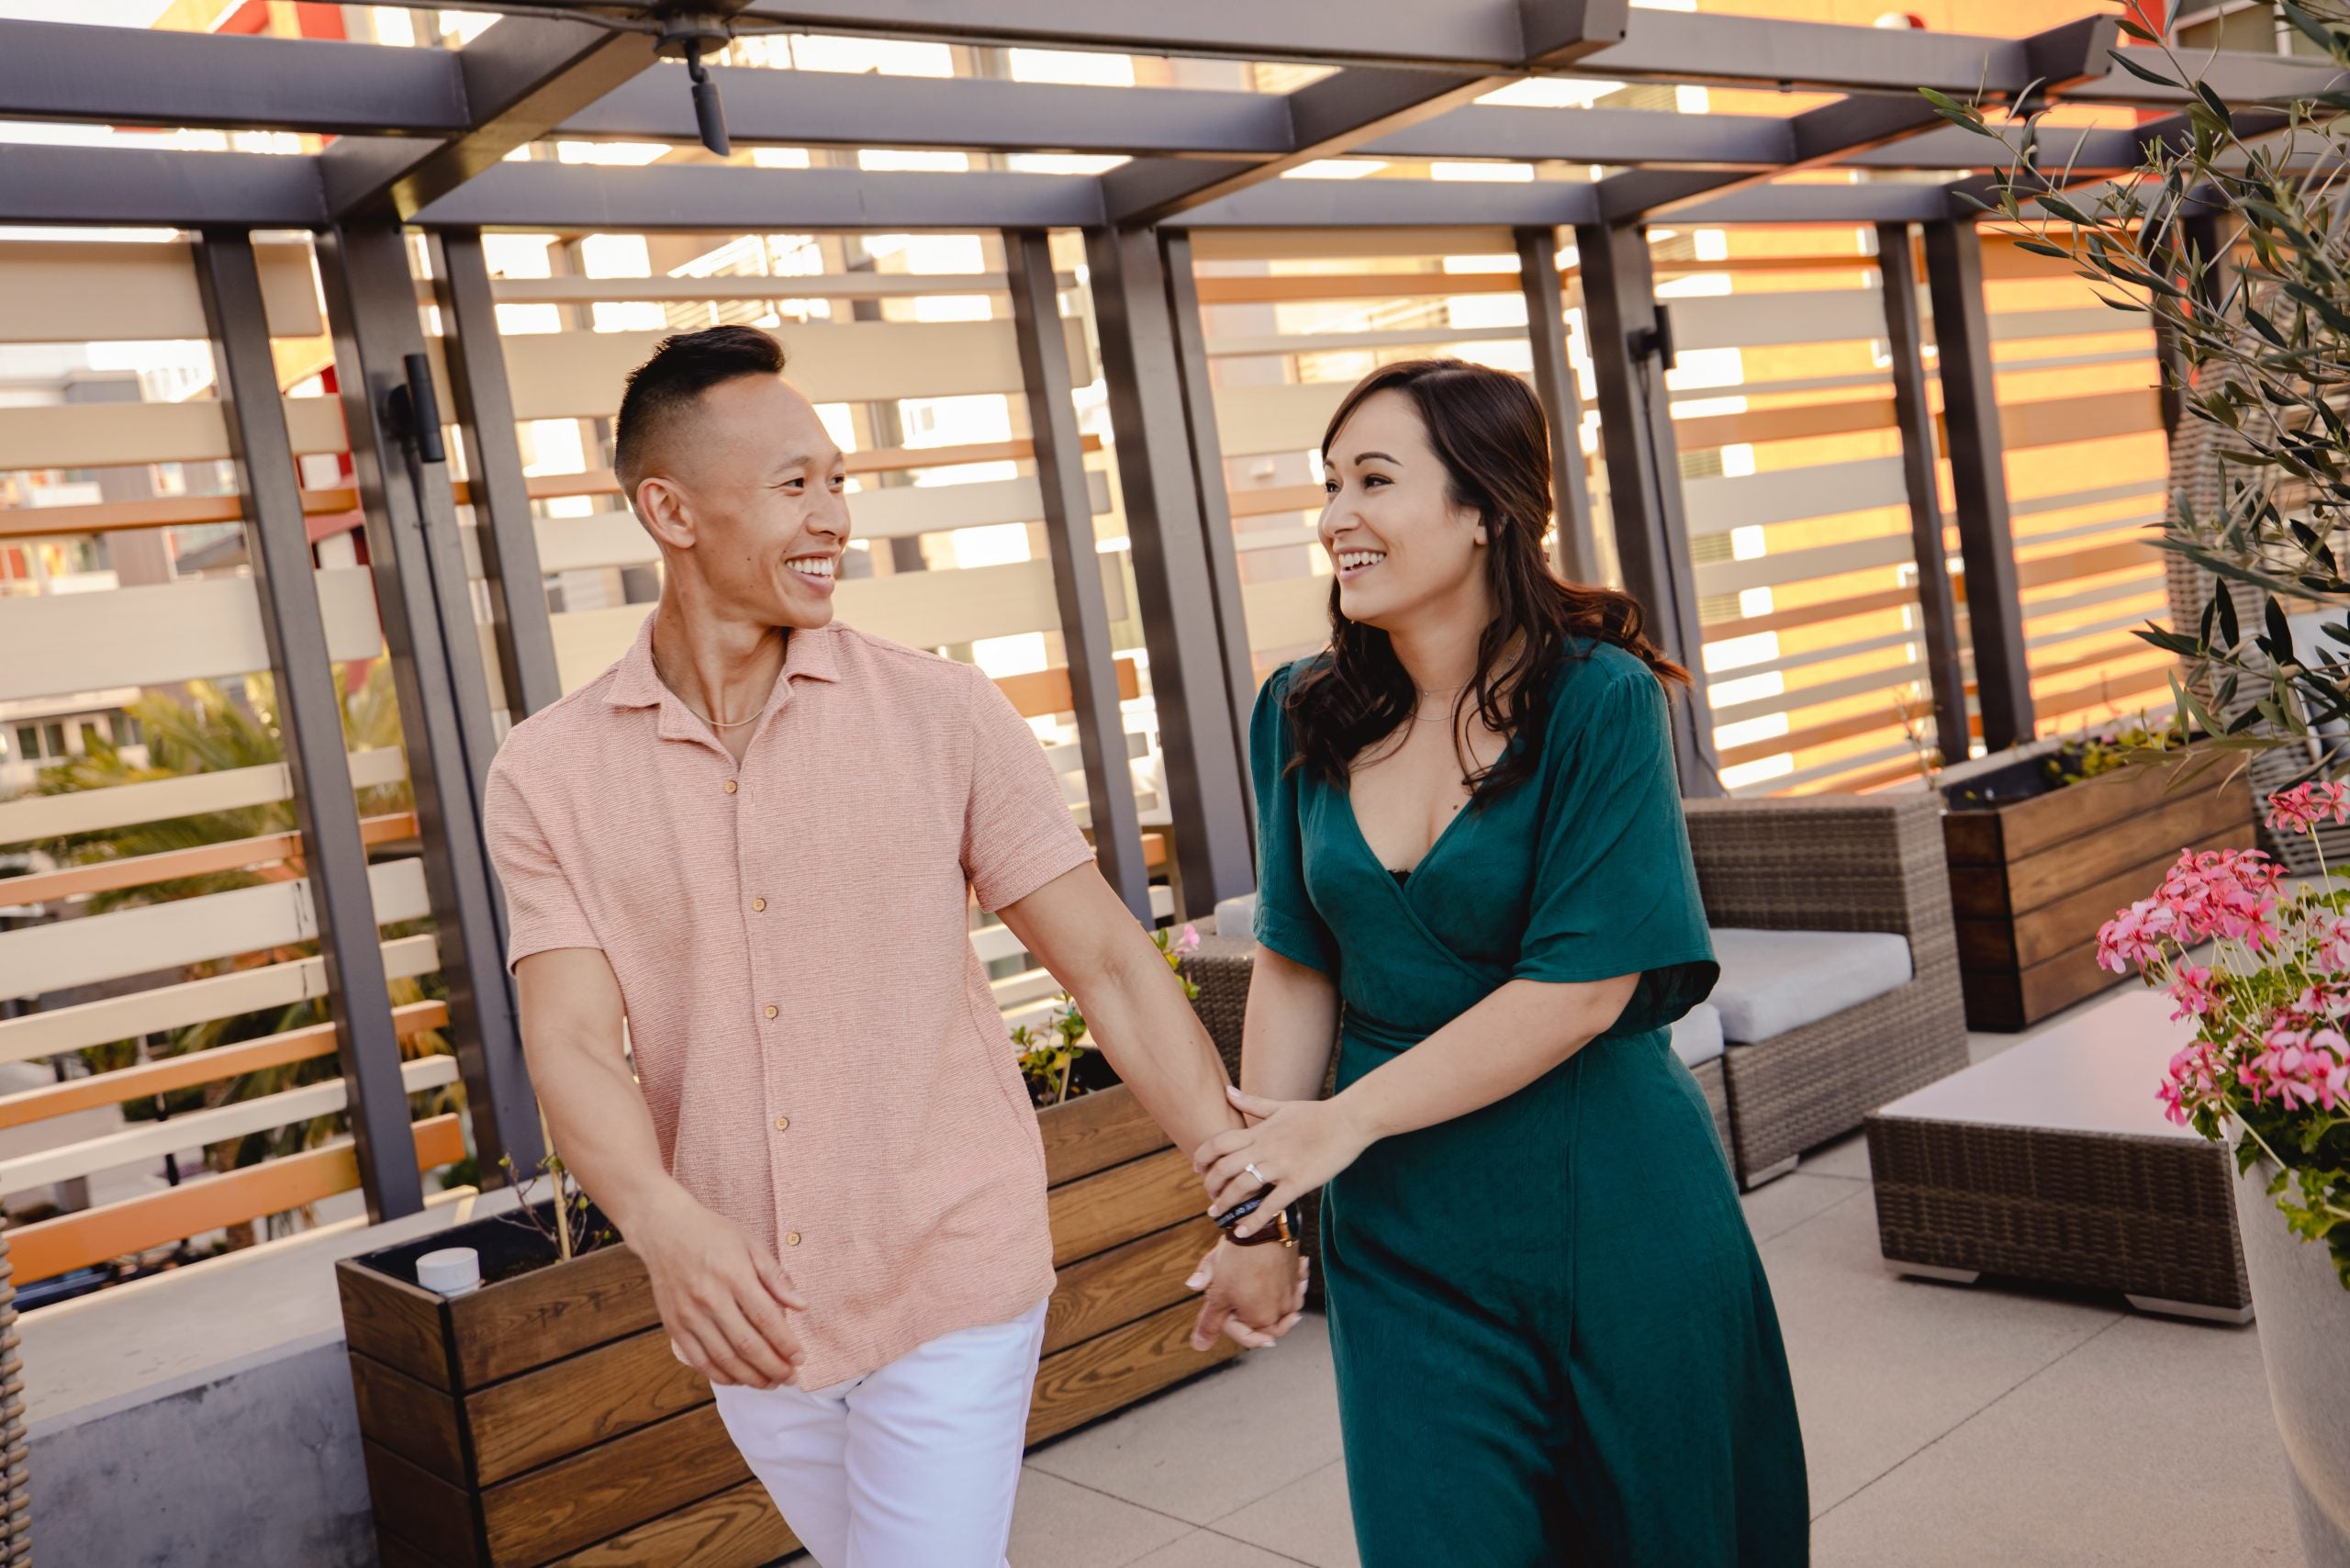 Binh and Morgan from 'Married at First Sight' holding hands